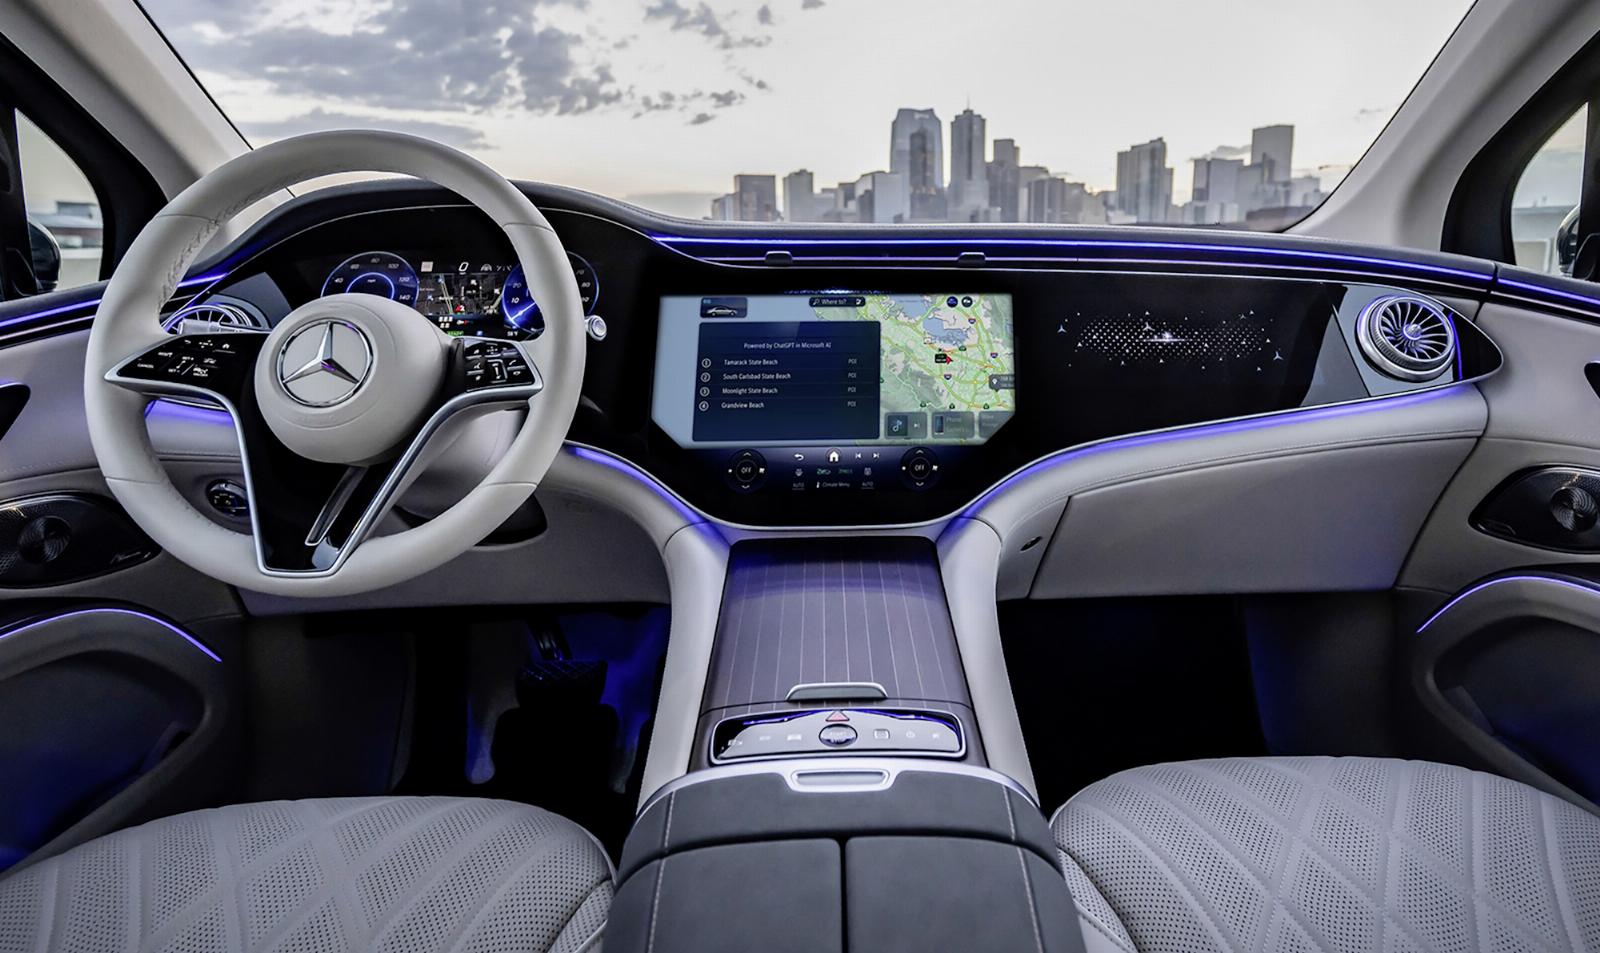 Mercedes is adding ChatGPT to its infotainment system, for some reason